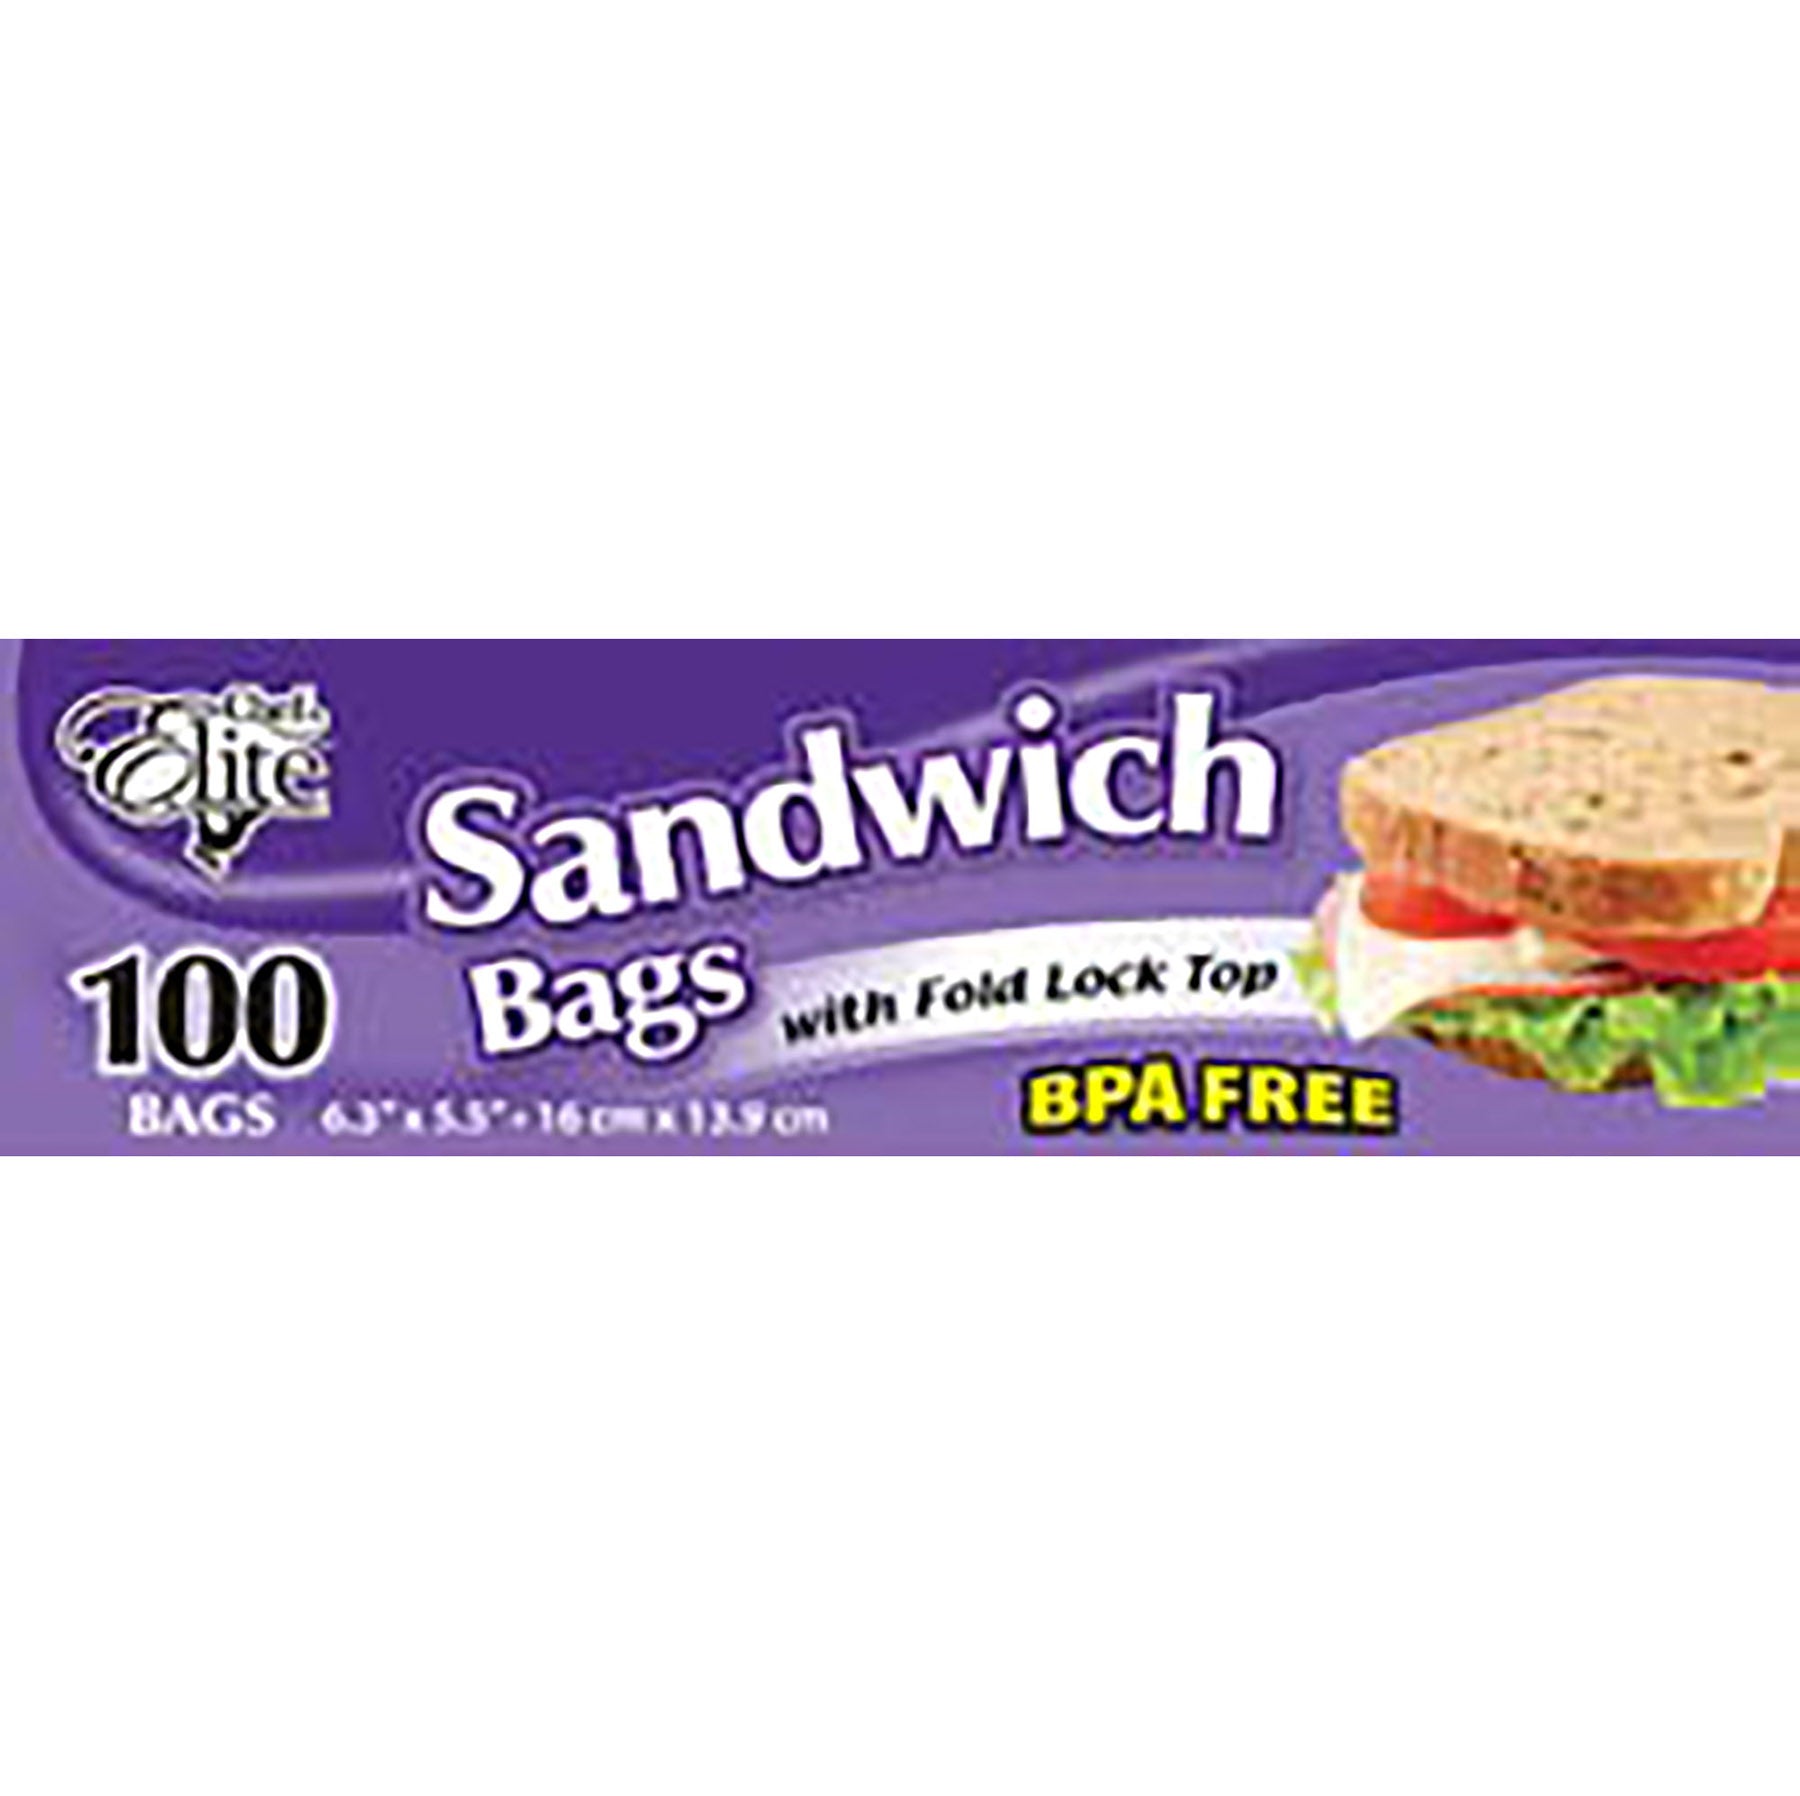 Chef Elite 100 Sandwich Bags with Fold Lock Top 6.3x5.5in